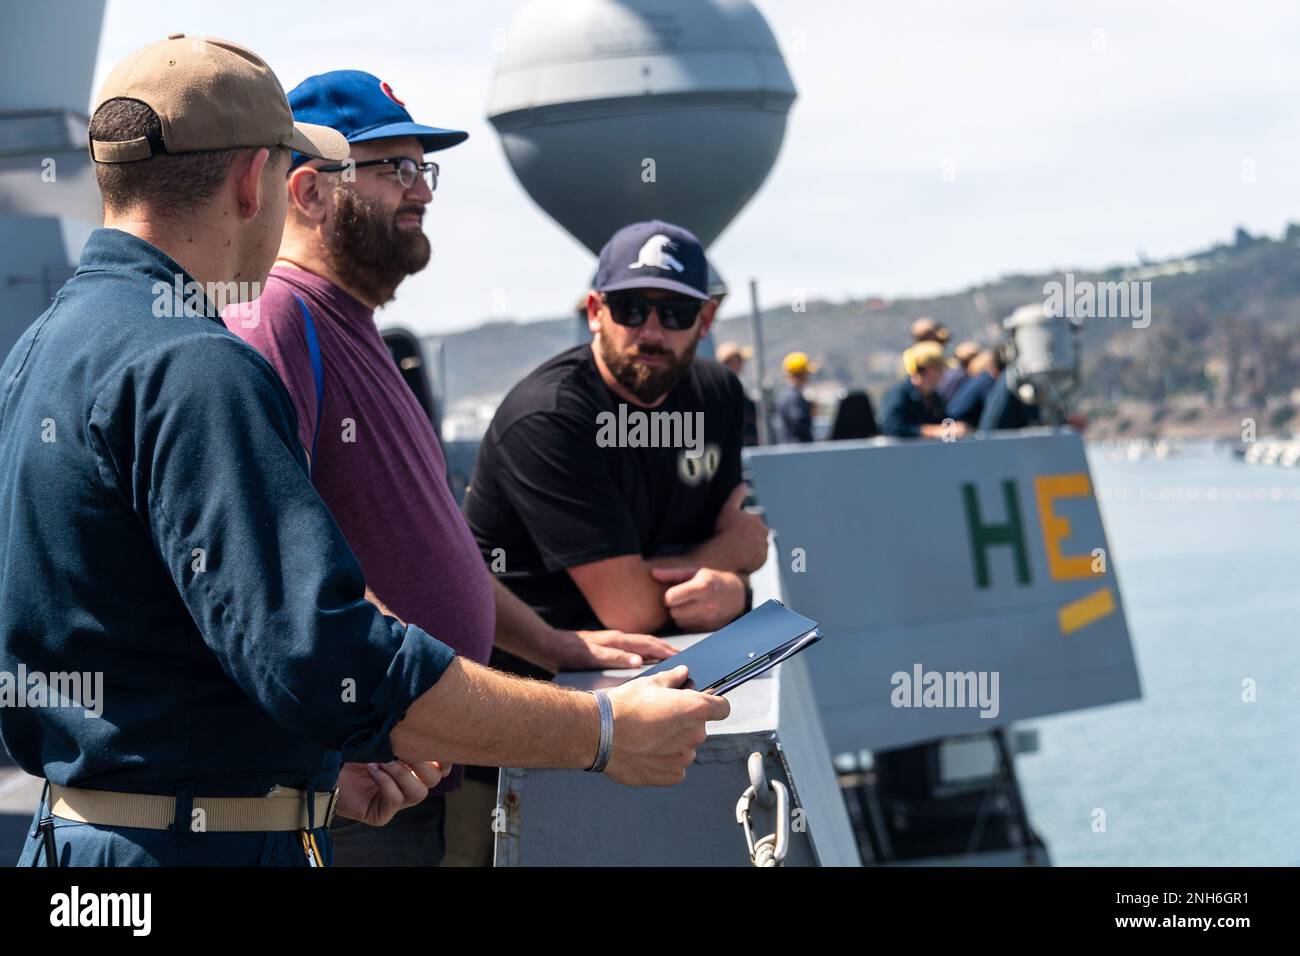 220720-N-VQ947-1046 SAN DIEGO (July 20, 2022) — Ensign Austen Cowper, left, speaks to Steve Walsh, center, a news reporter from KPBS, and Ian Urtnowski, right, from the C4 Foundation and URT Clothing brand, aboard San Antonio-class amphibious transport dock ship USS Portland (LPD 27) as it arrives at the Point Loma fuel pier in San Diego during Rim of the Pacific (RIMPAC) Southern California. Twenty-six nations, 38 ships, three submarines, more than 170 aircraft and 25,000 personnel are participating in RIMPAC from June 29 to Aug. 4 in and around the Hawaiian Islands and Southern California. T Stock Photo